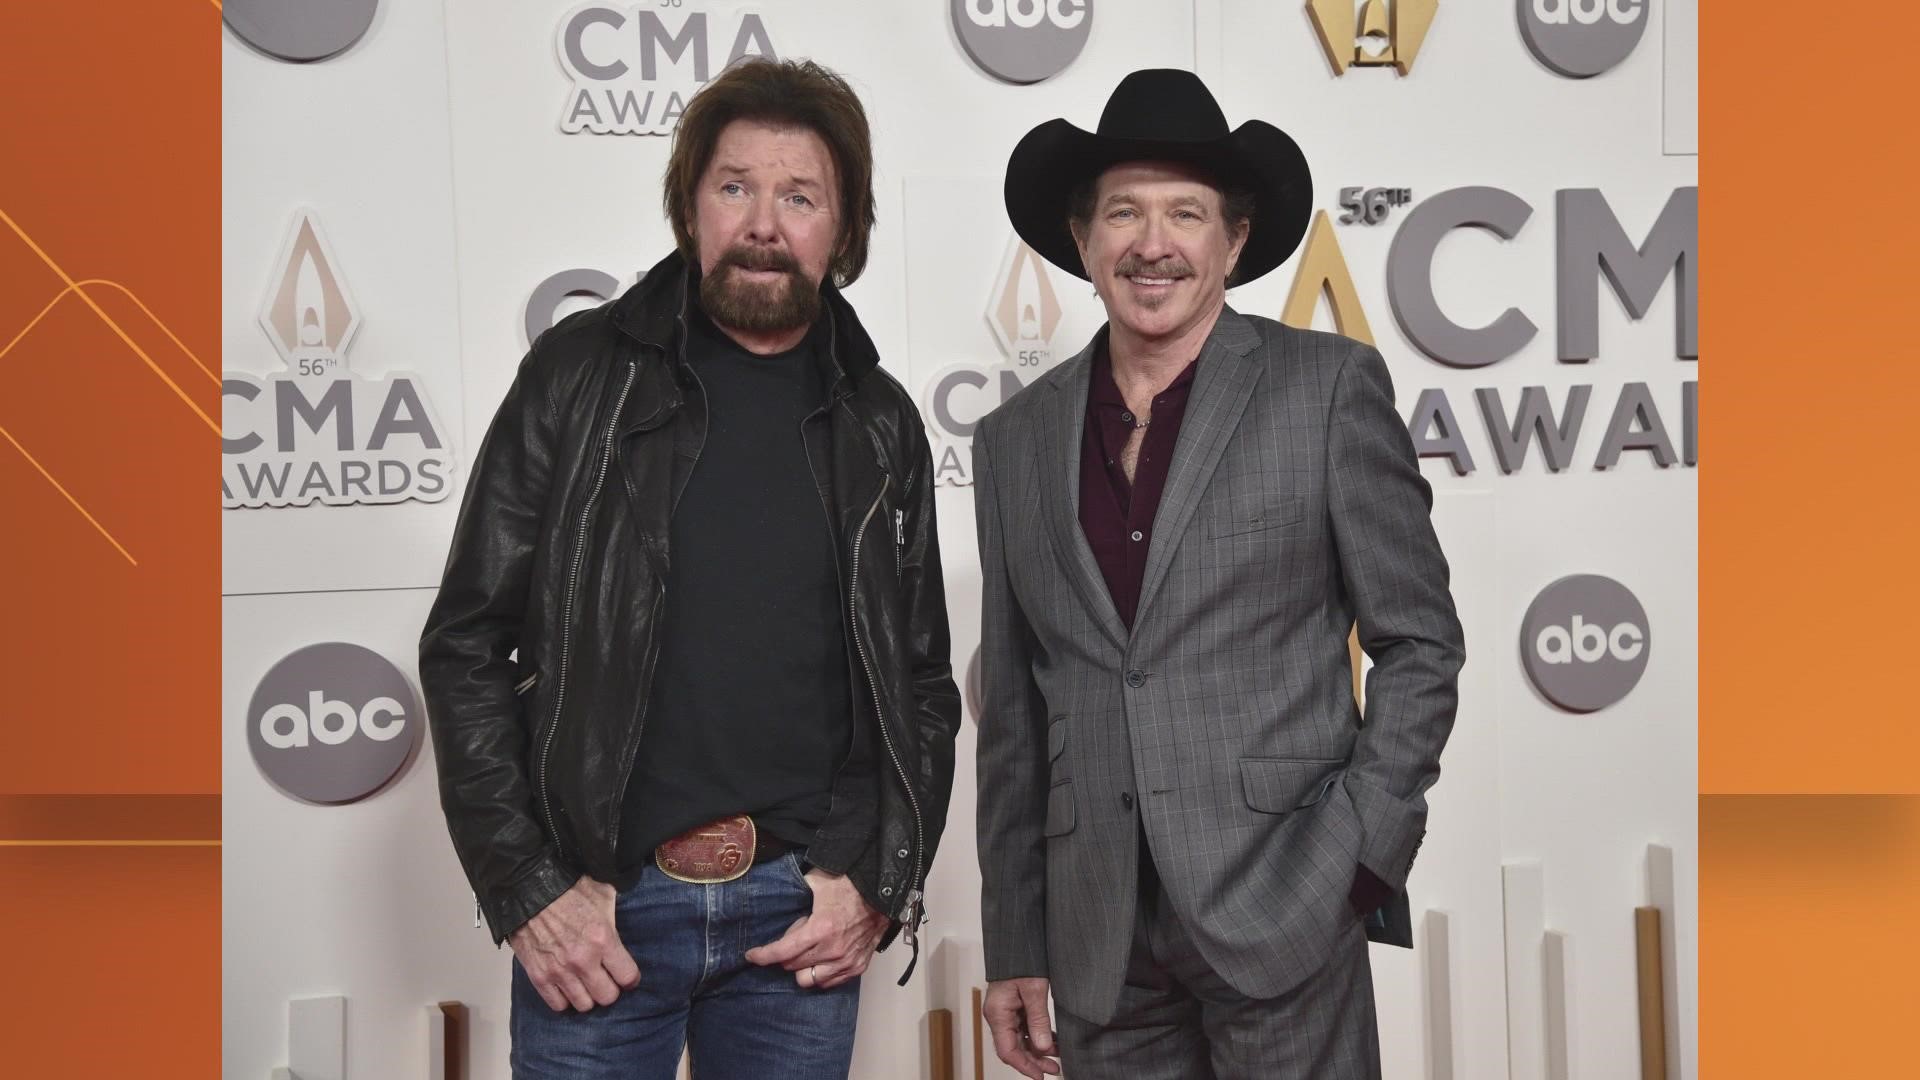 The iconic country duo was announced along with Shane Smith & The Saints, The Randy Rogers Band, Grupo El Duelo, John Michael Montgomery, and more.